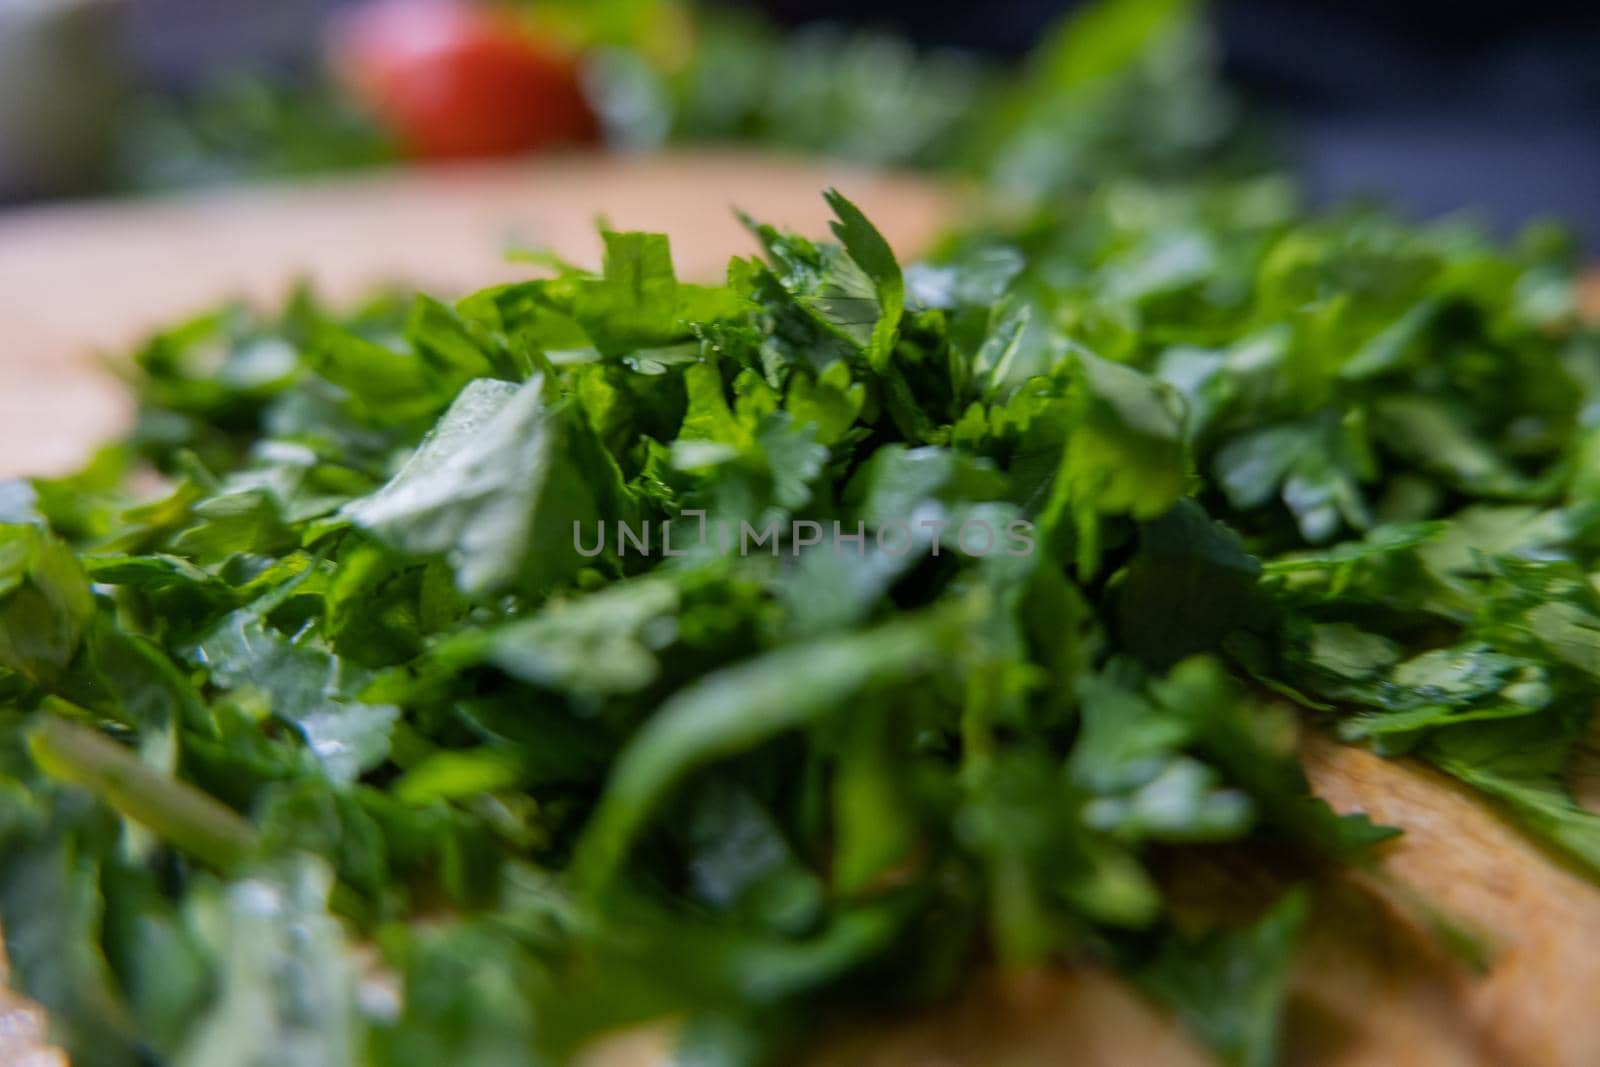 Close-up of freshly chopped coriander on wooden cutting board with blurry background. Fresh green vegetables and herbs cut into pieces above wood surface. Traditional sauce preparation